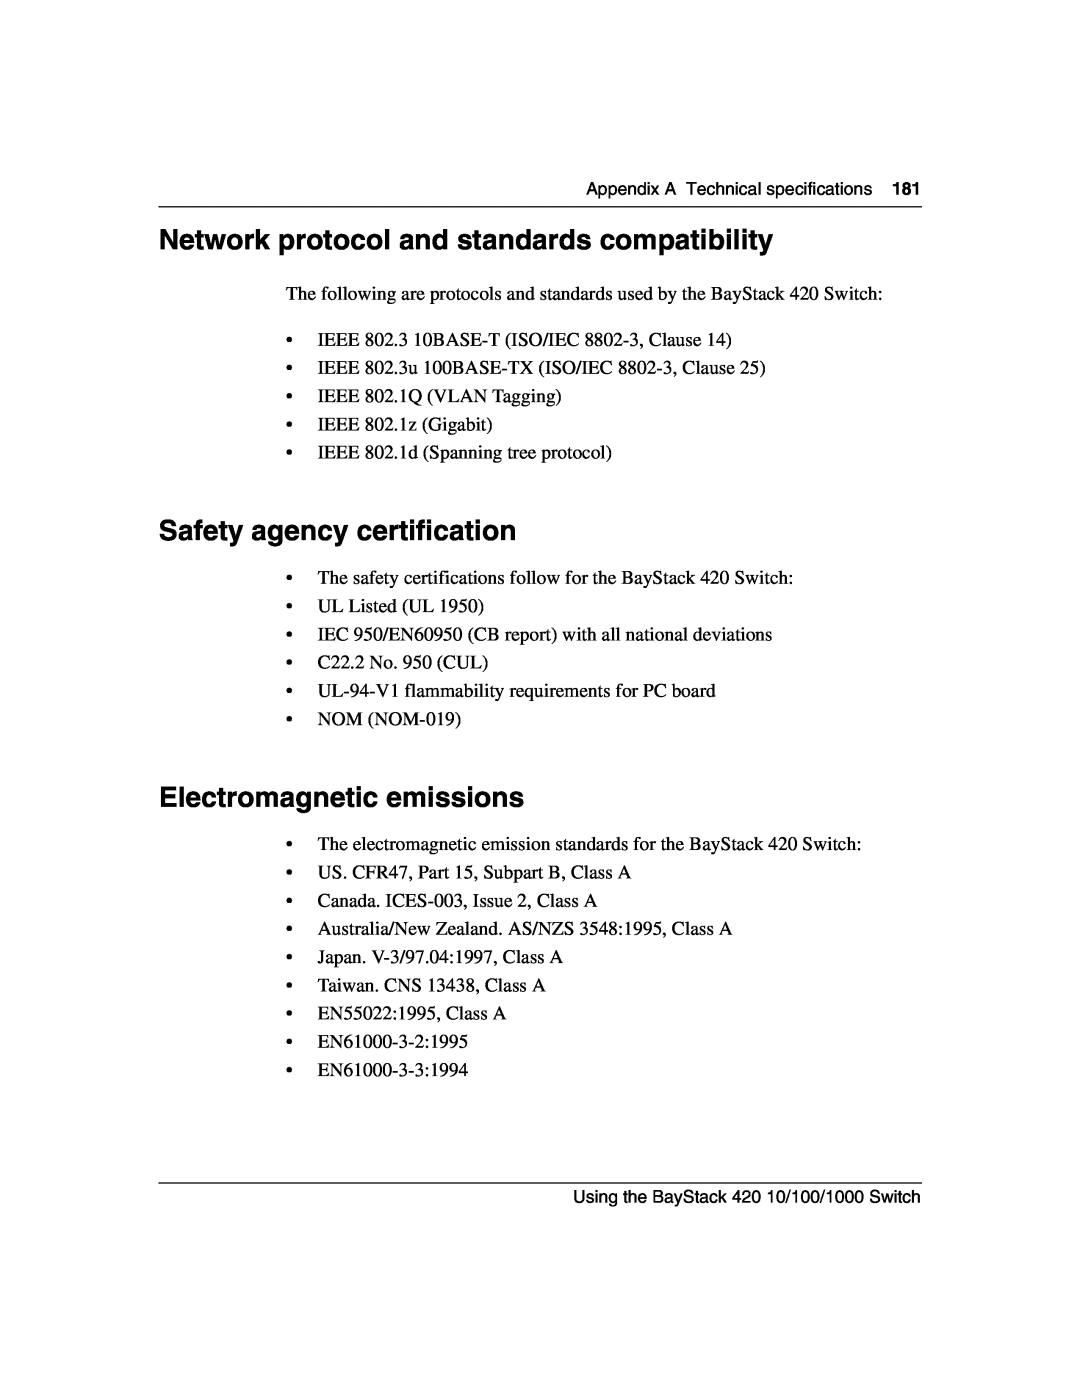 Nortel Networks 1000ASE-XD, 1000BASE-SX manual Network protocol and standards compatibility, Safety agency certification 